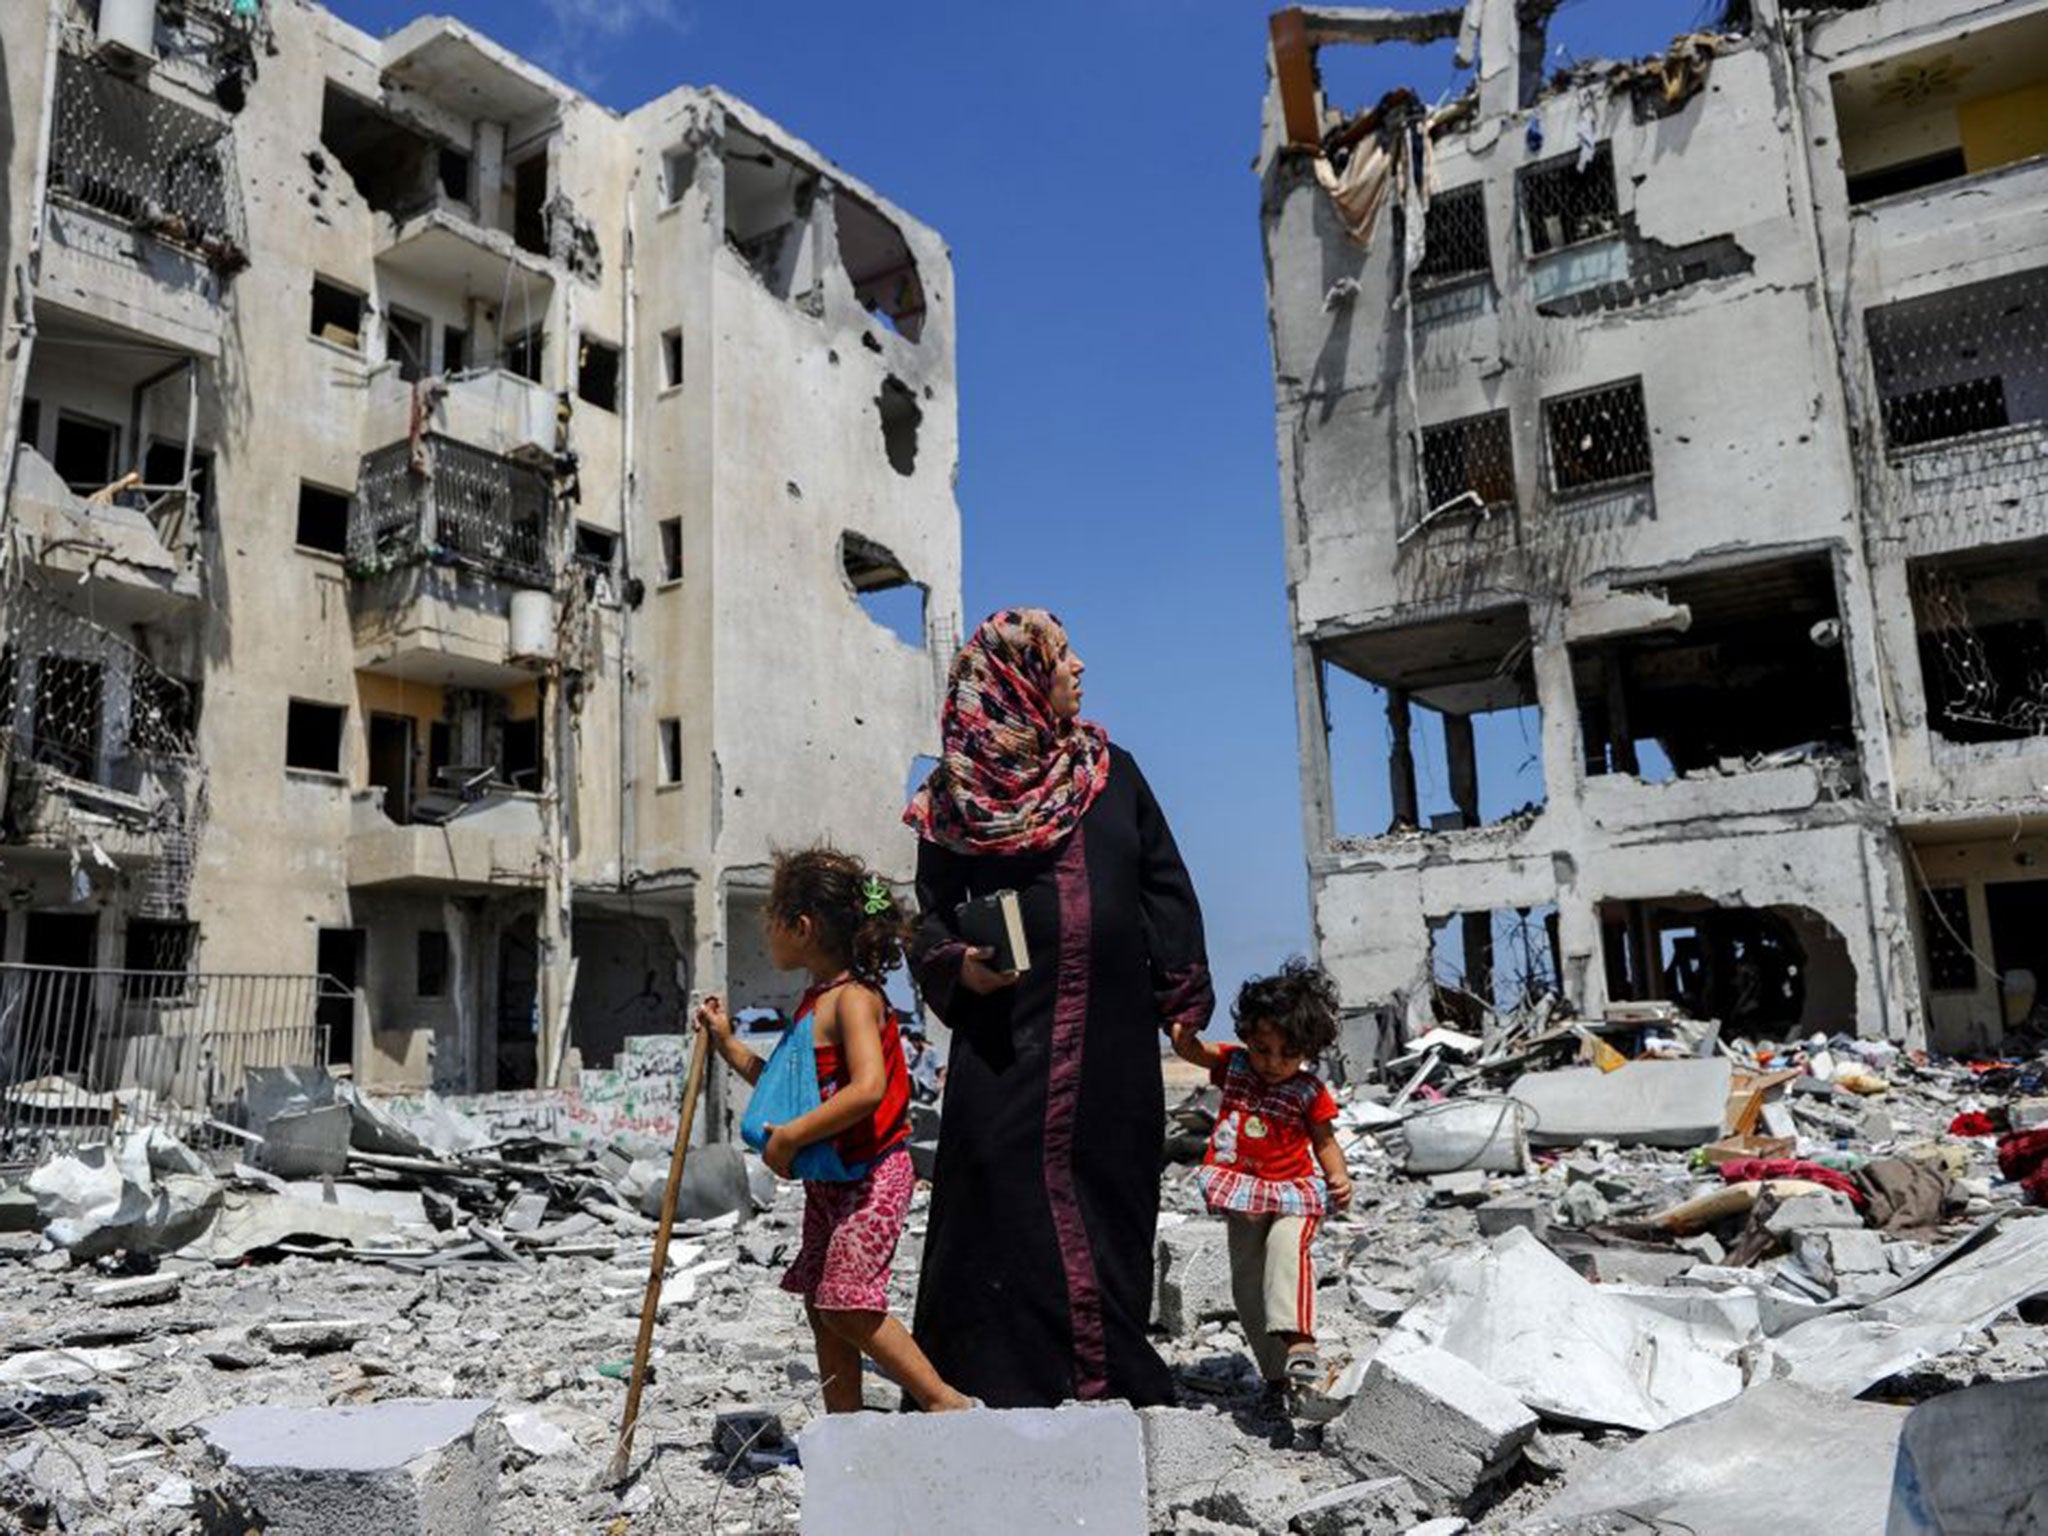 Palestinians sift through the rubble in Beit Lahia, Gaza, in a search for useful belongings